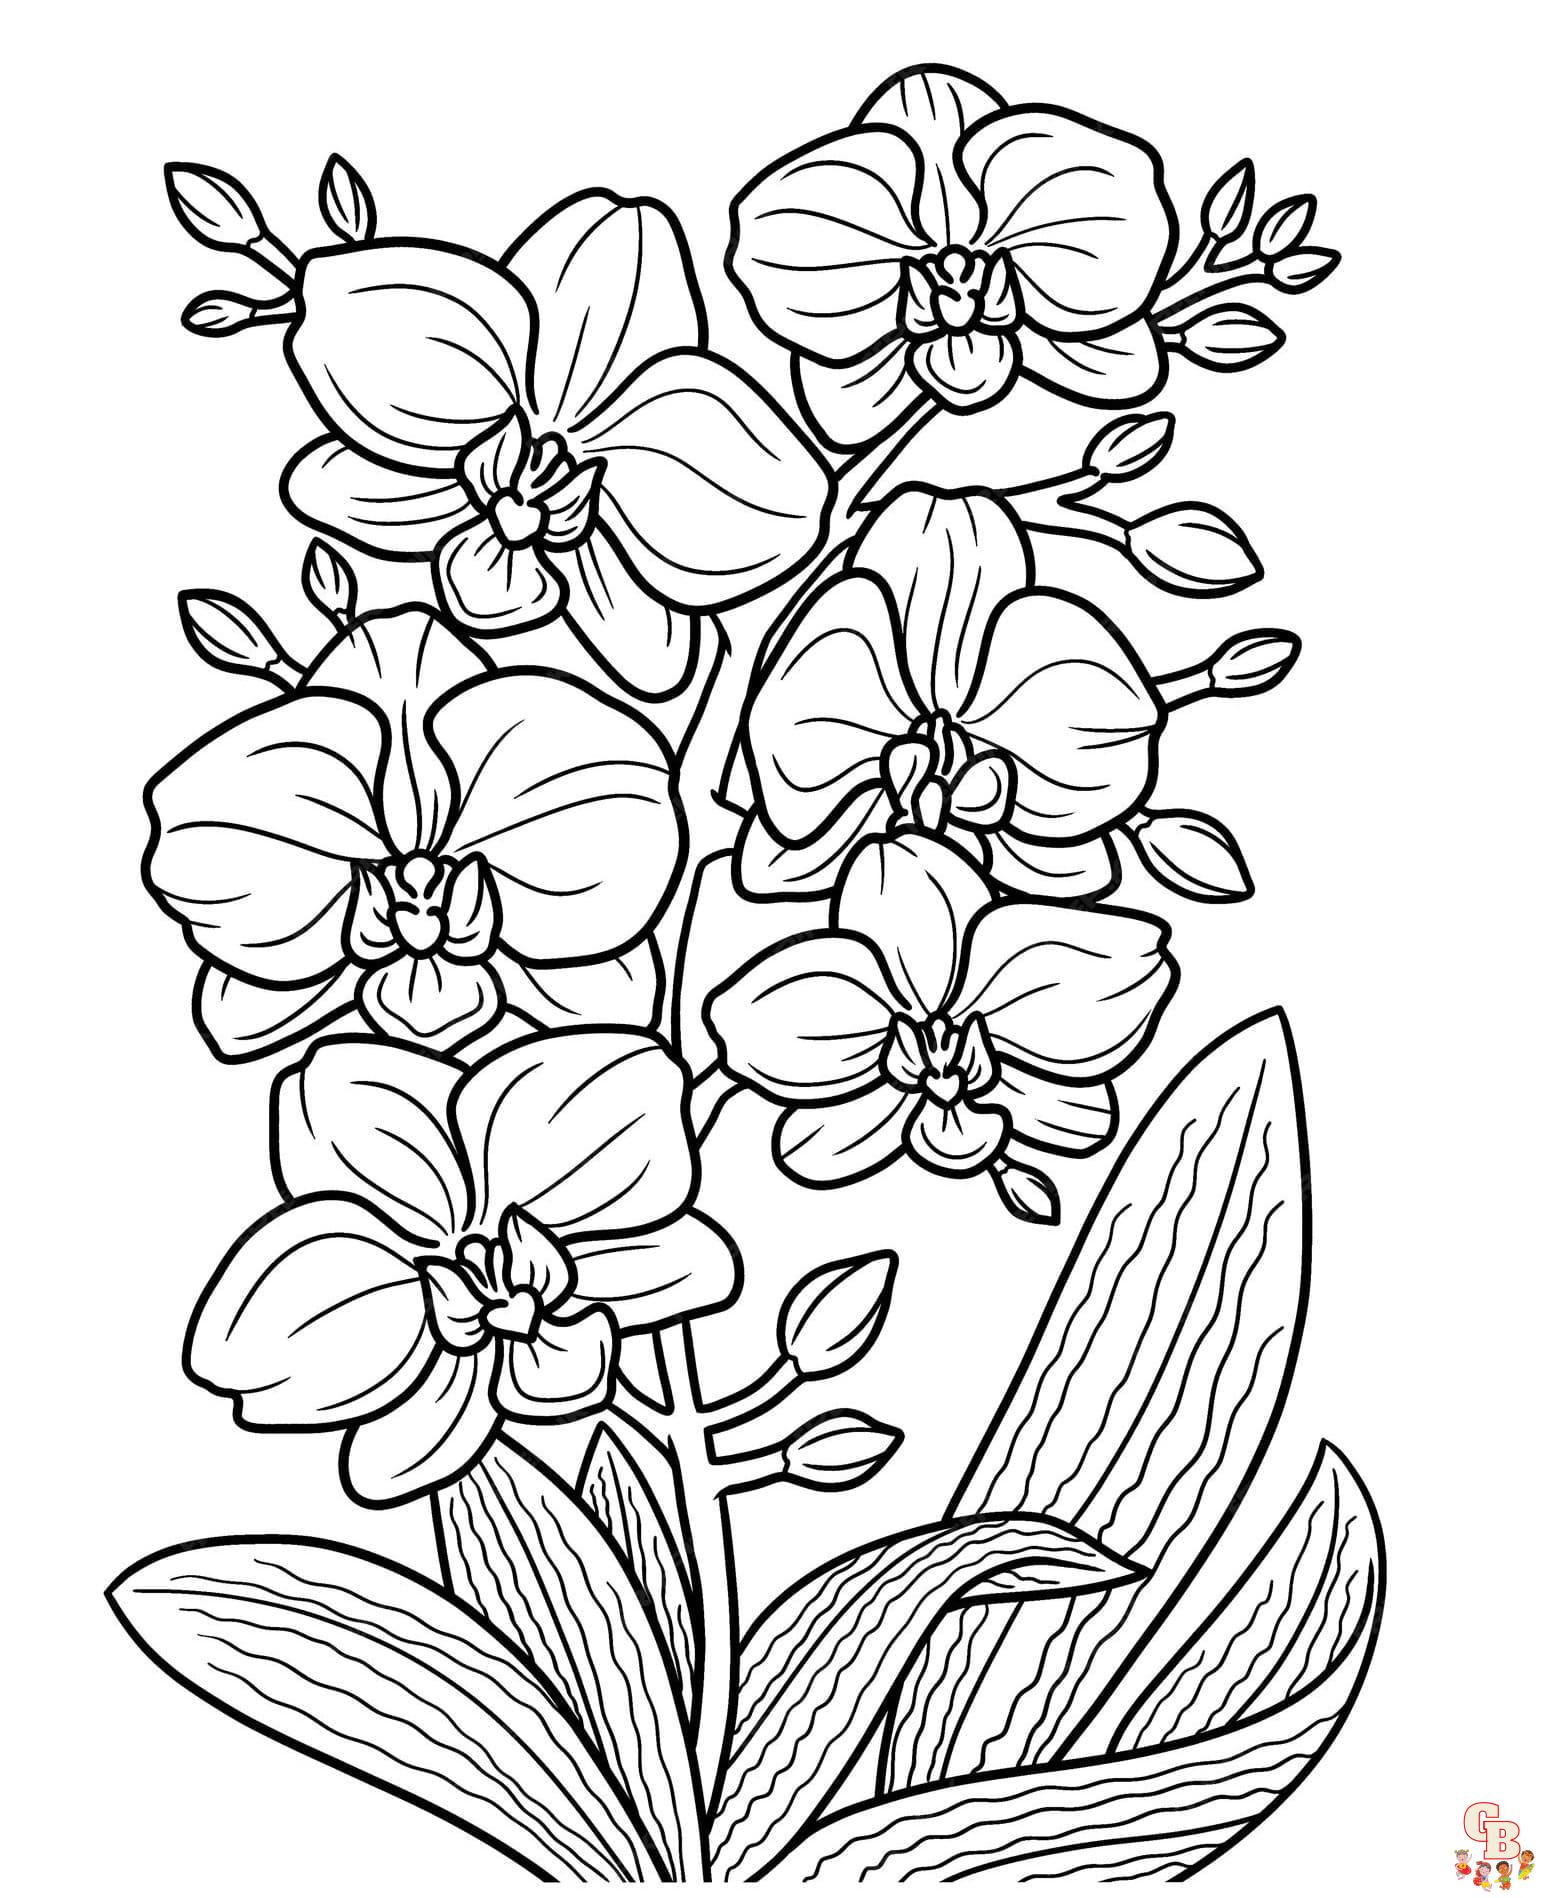 Printable Orchid coloring sheets